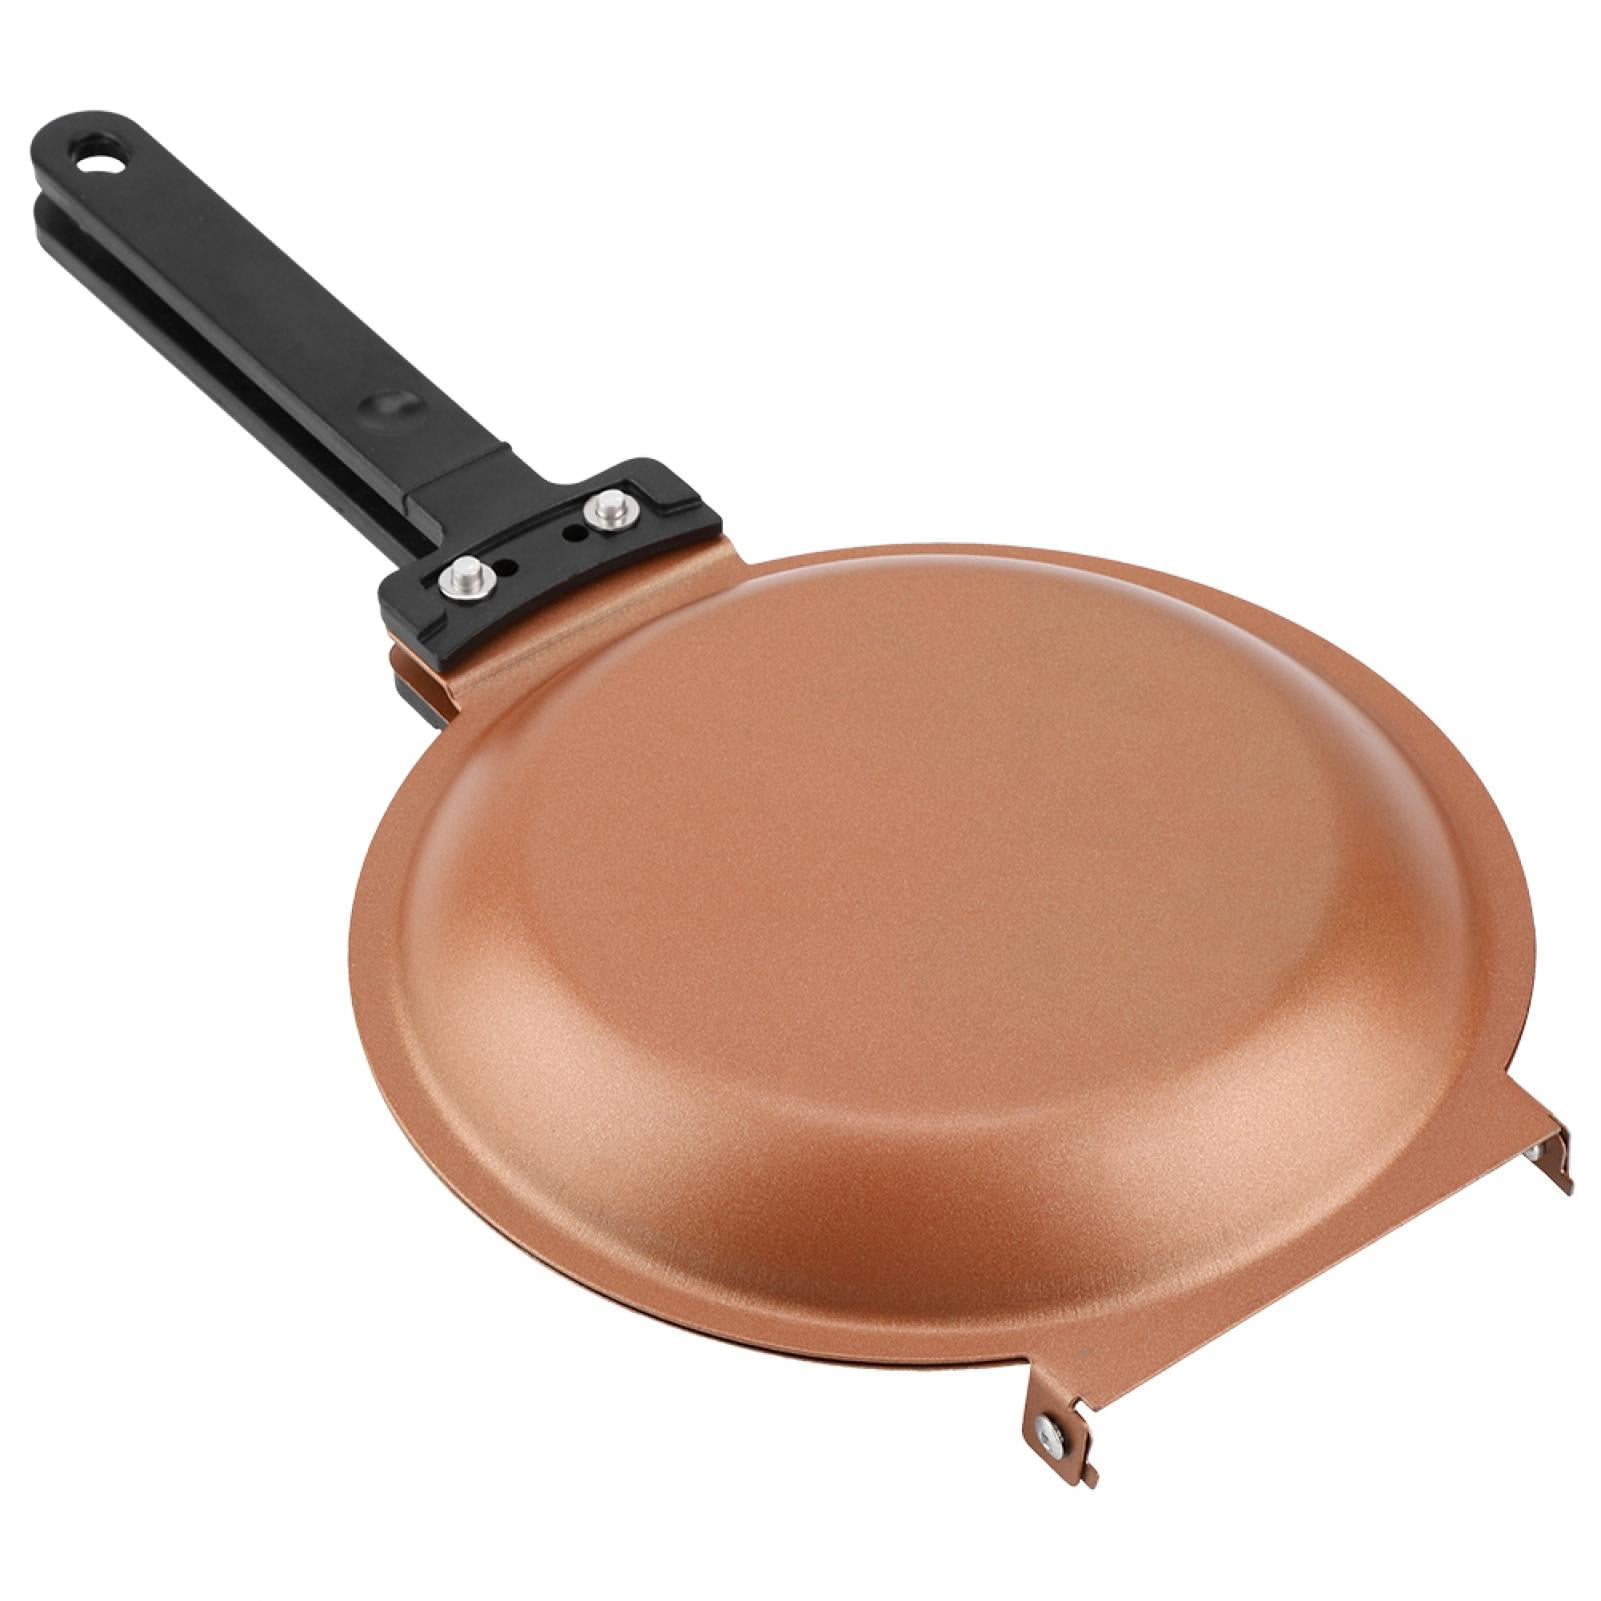 Double Sided Frying Pan Non-Stick Ceramic Flip Frying Pan Pancake Maker  Household Kitchen Cookware 6.5X7.6 inch New